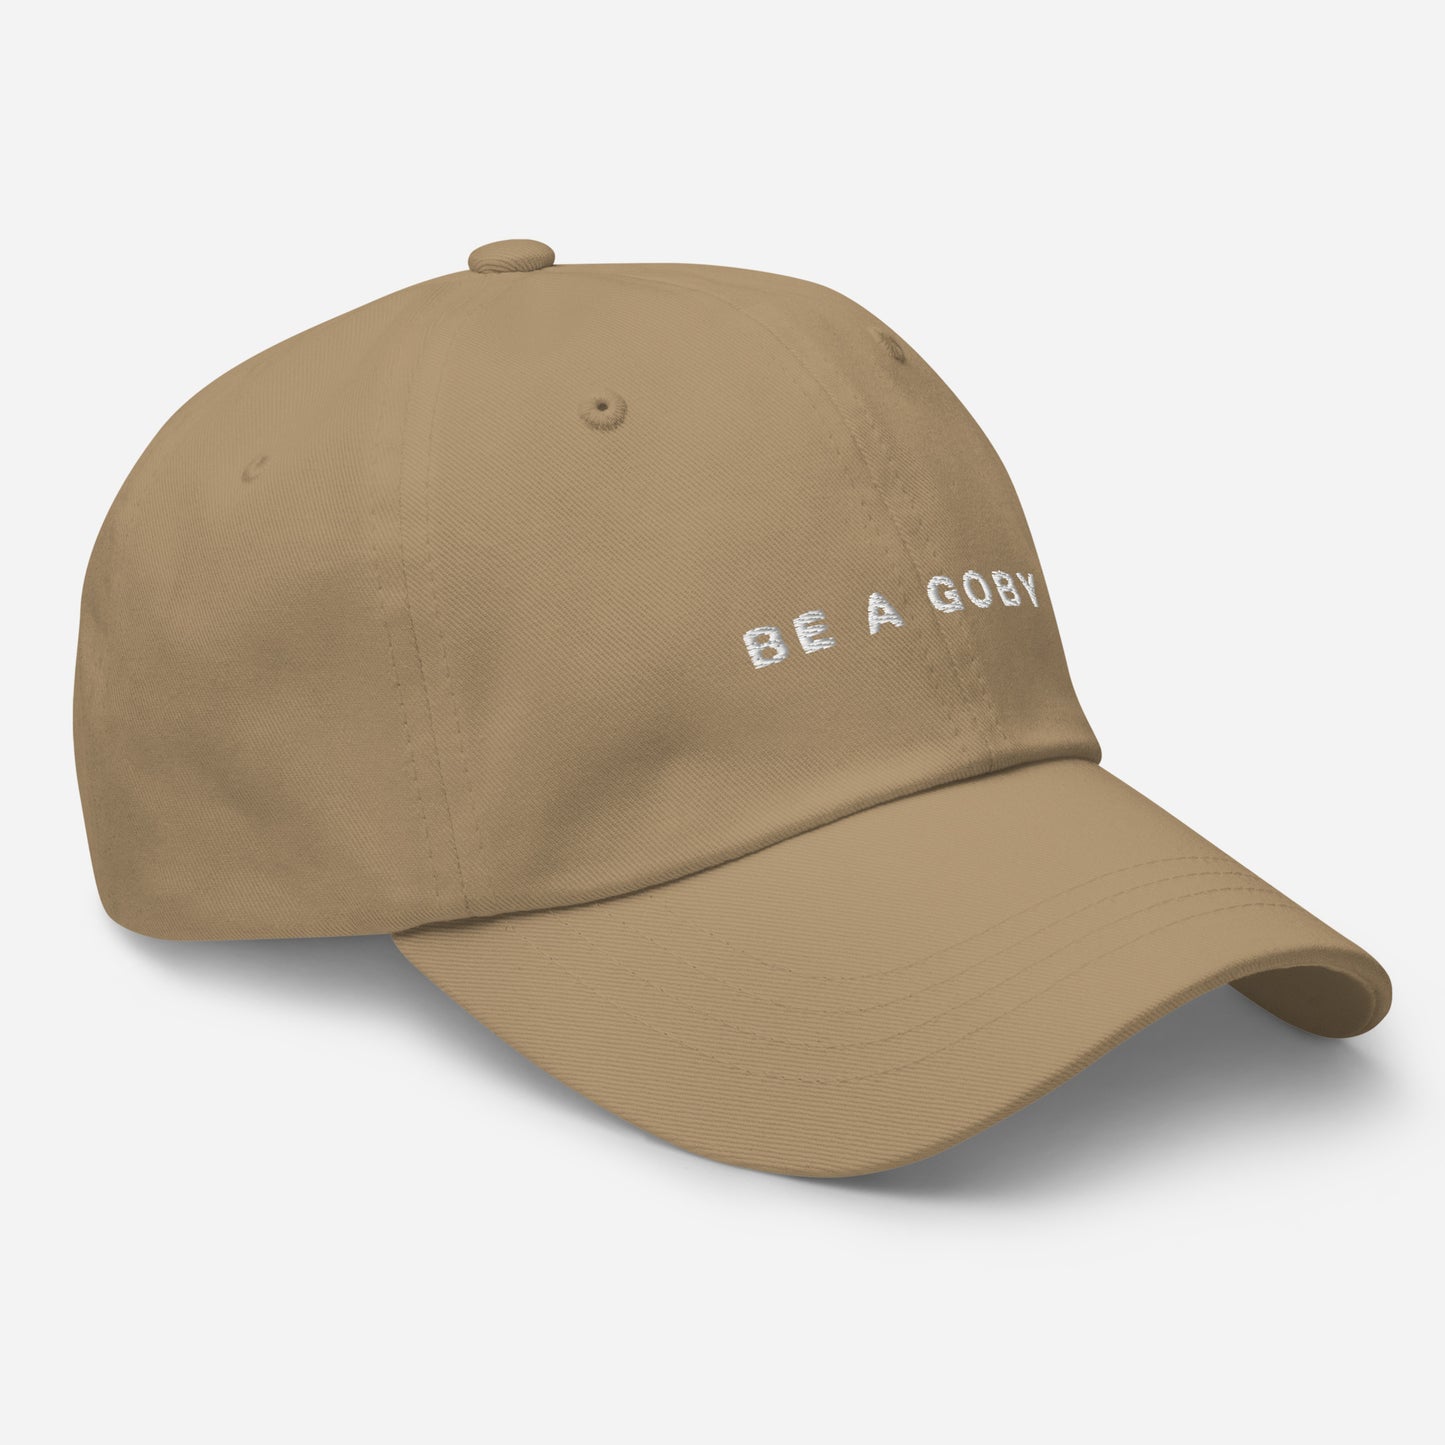 Be a Goby Hat